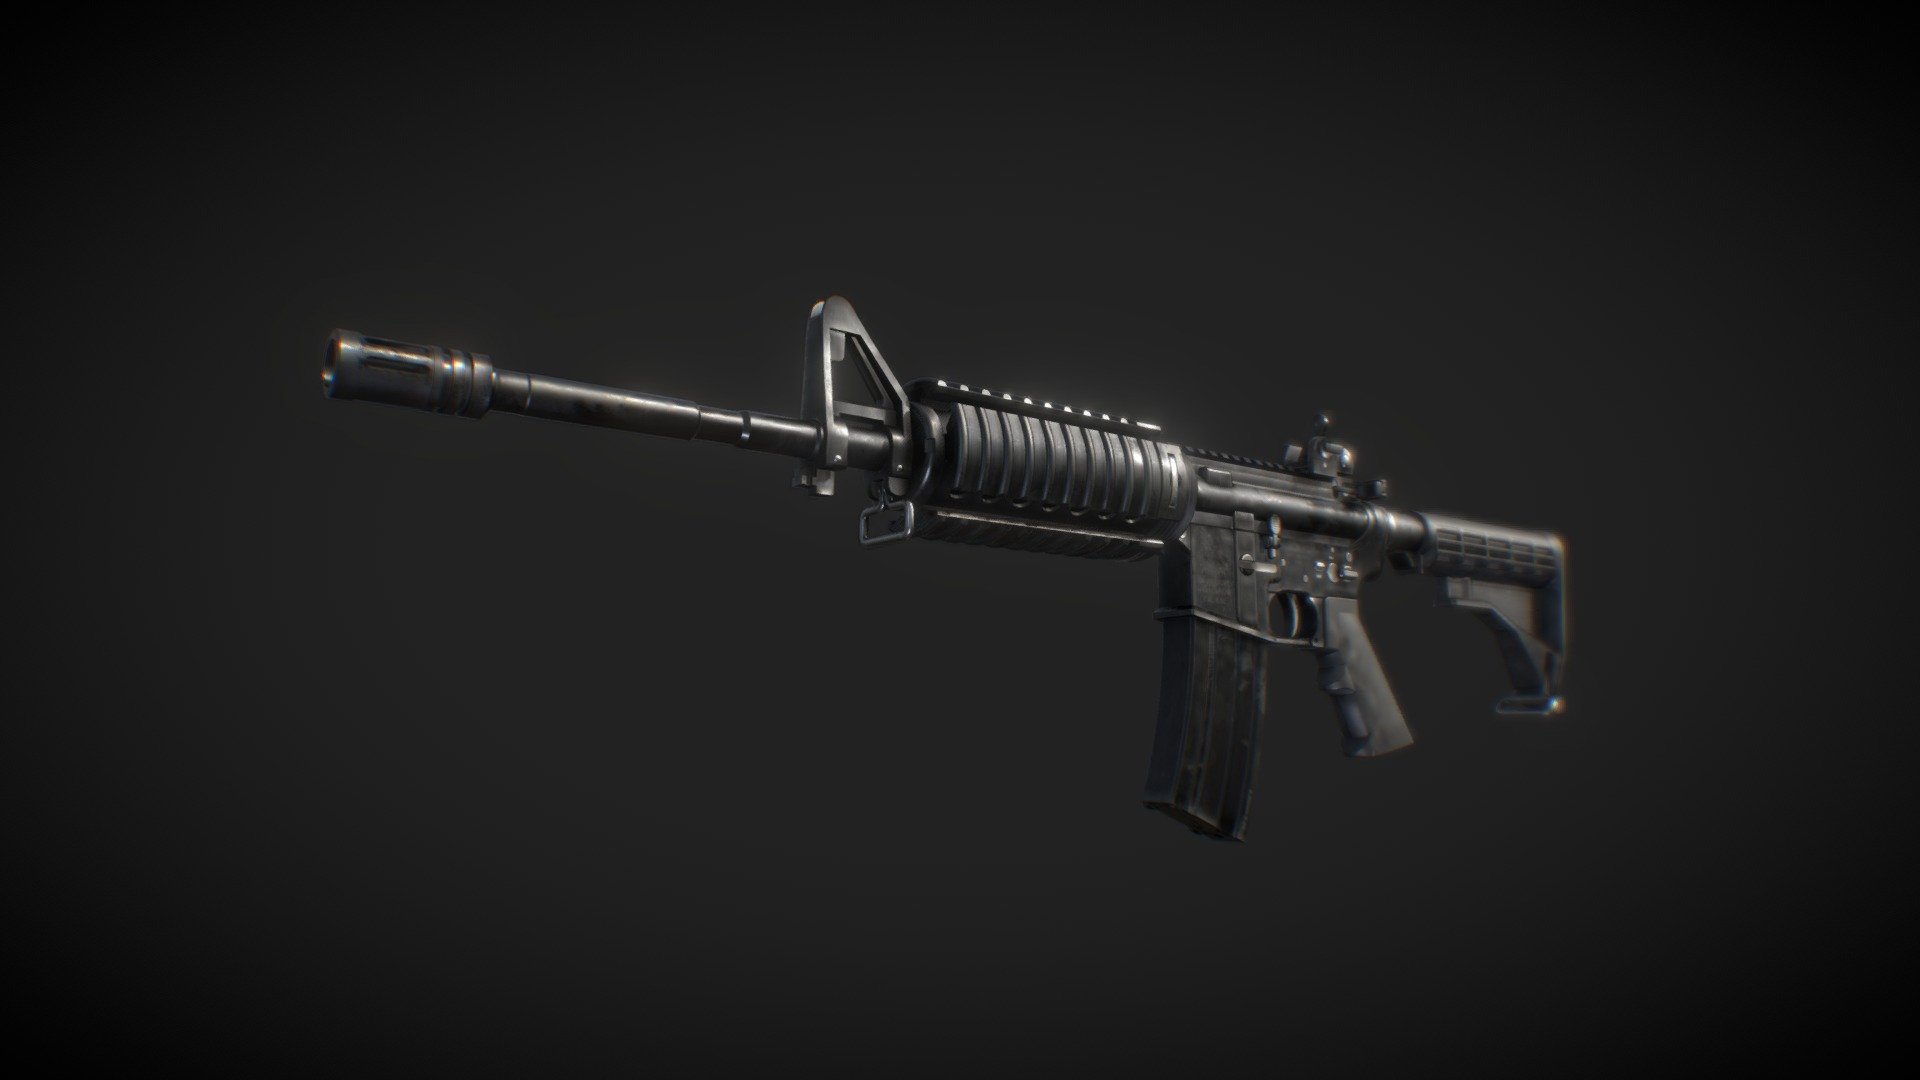 The M4 carbine is a 5.56×45mm NATO, gas-operated, magazine-fed, carbine developed in the United States during the 1980s. The M4 is extensively used by the United States Armed Forces, with decisions to largely replace the M16 rifle in United States Army (starting 2010) and United States Marine Corps (USMC) (starting 2016) combat units as the primary infantry weapon and service rifle.Since its adoption in 1994, the M4 has undergone over 90 modifications to improve the weapon's ergonomics and modularity, including: the M4A1, which strengthened the barrel and removed the burst-fire option; the SOPMOD, an accessory kit containing optical attachments; and the underbarrel M203 grenade launcher 3d model